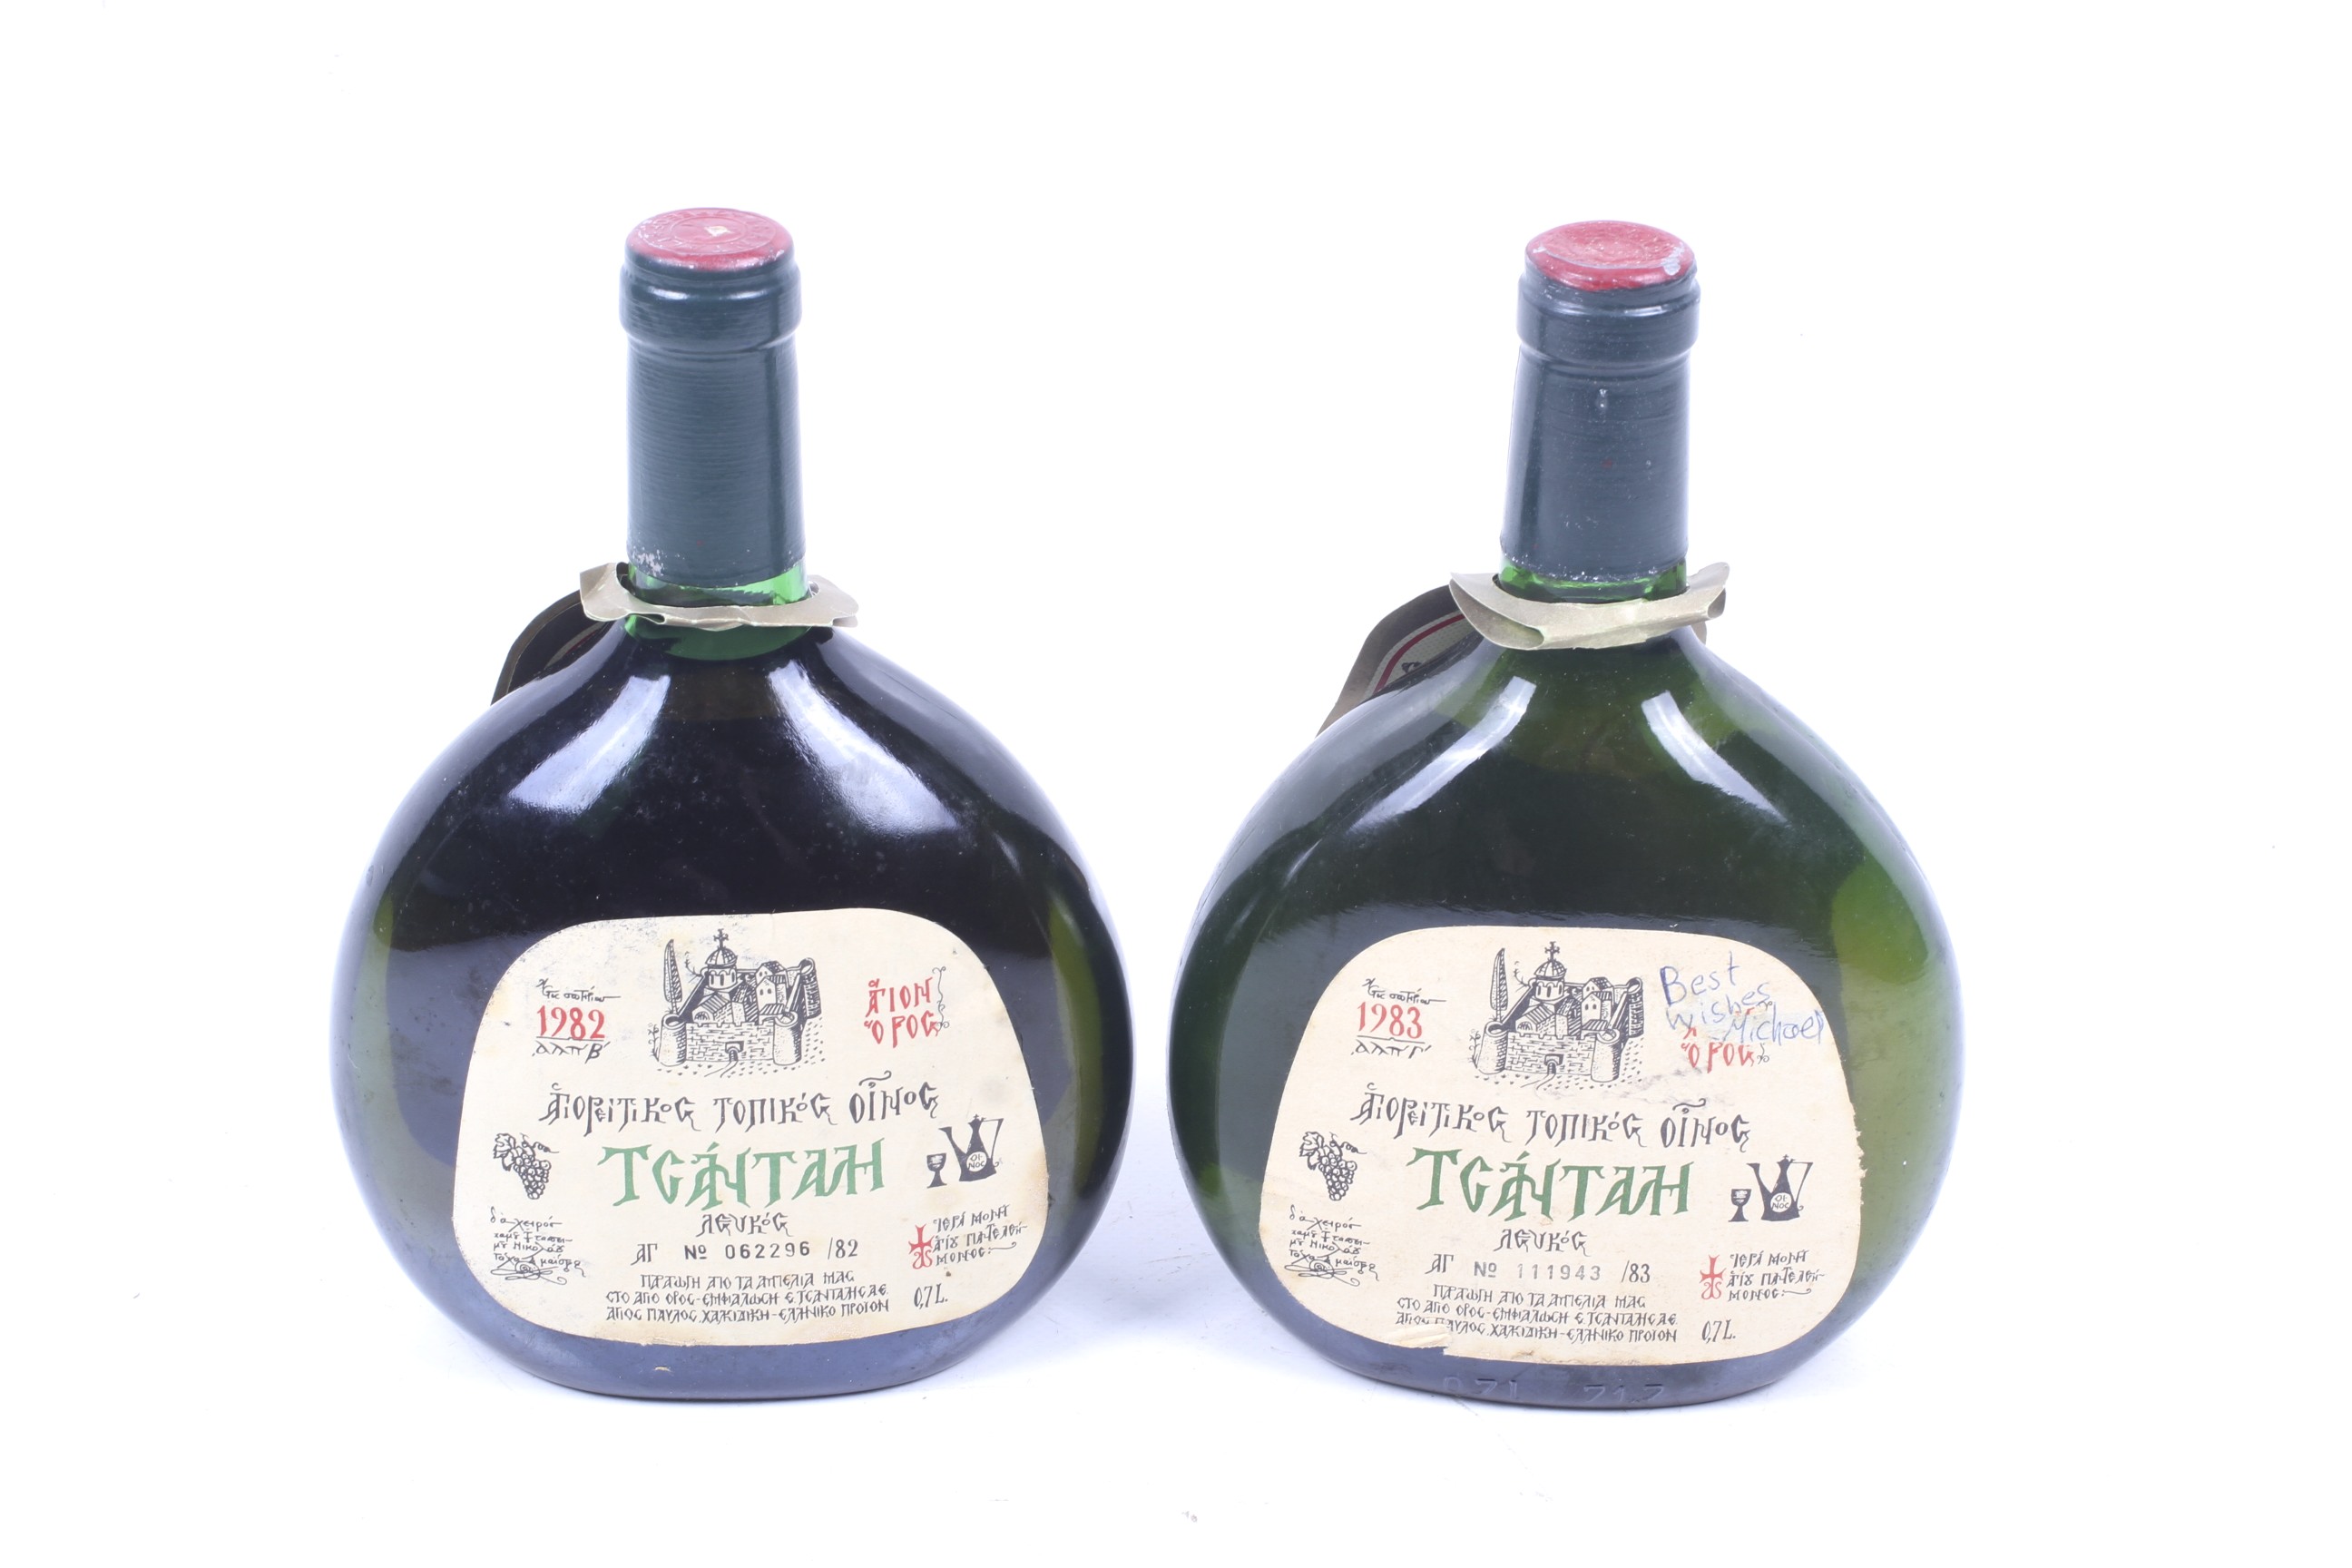 Two bottles of Tgantah white wine. From Greece, one 1982 and one 1983 both 70cl, no vol shown. - Image 2 of 4